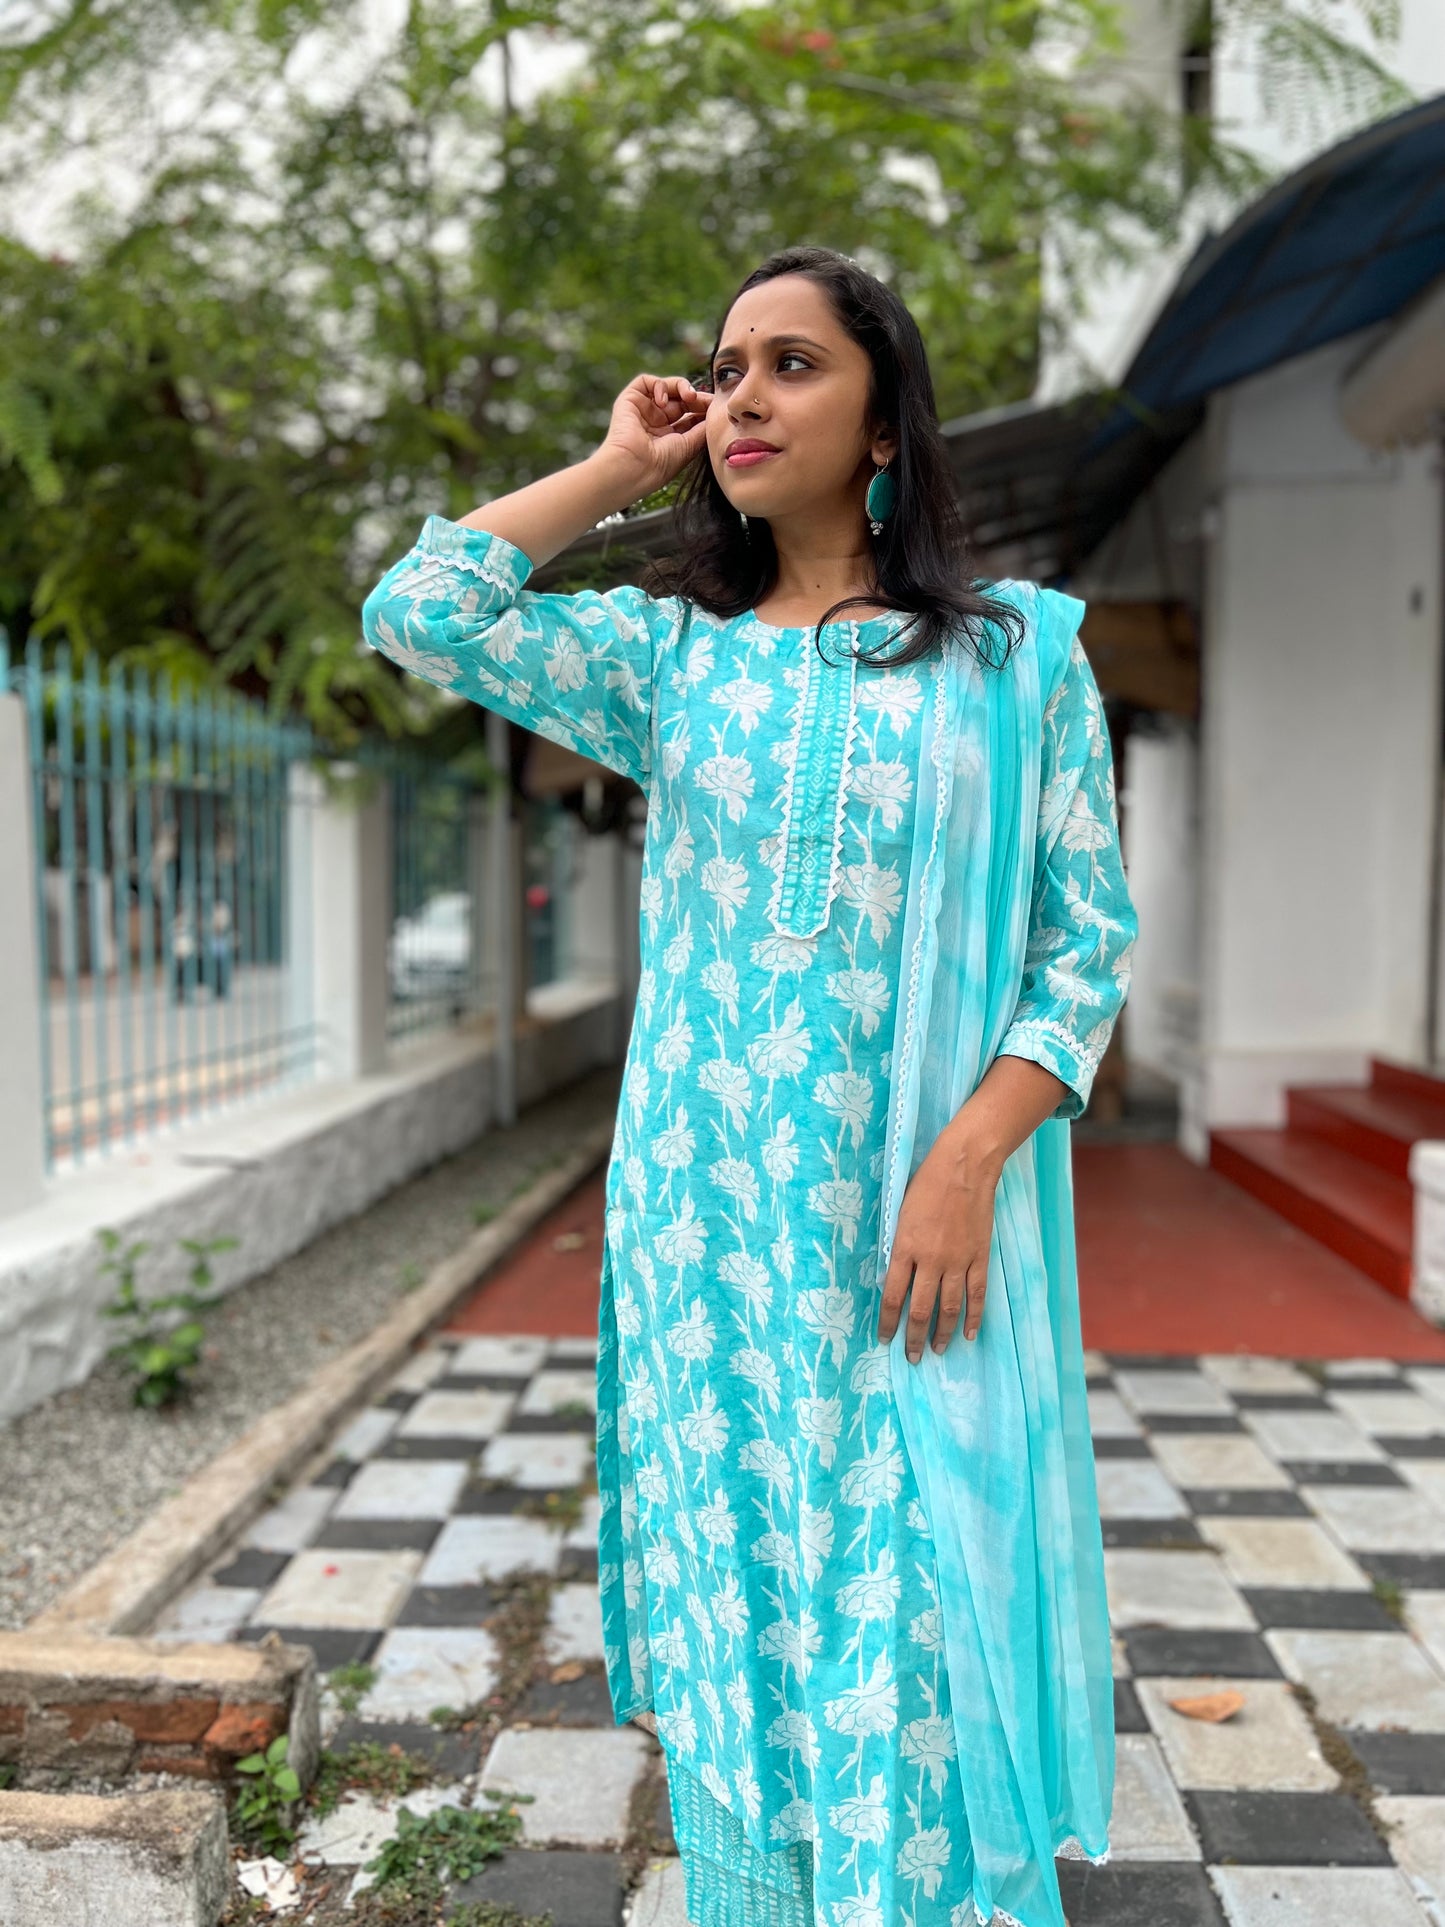 Southloom Stitched Chanderi Silk Salwar Set in Light Blue Colour with Floral Printed Design